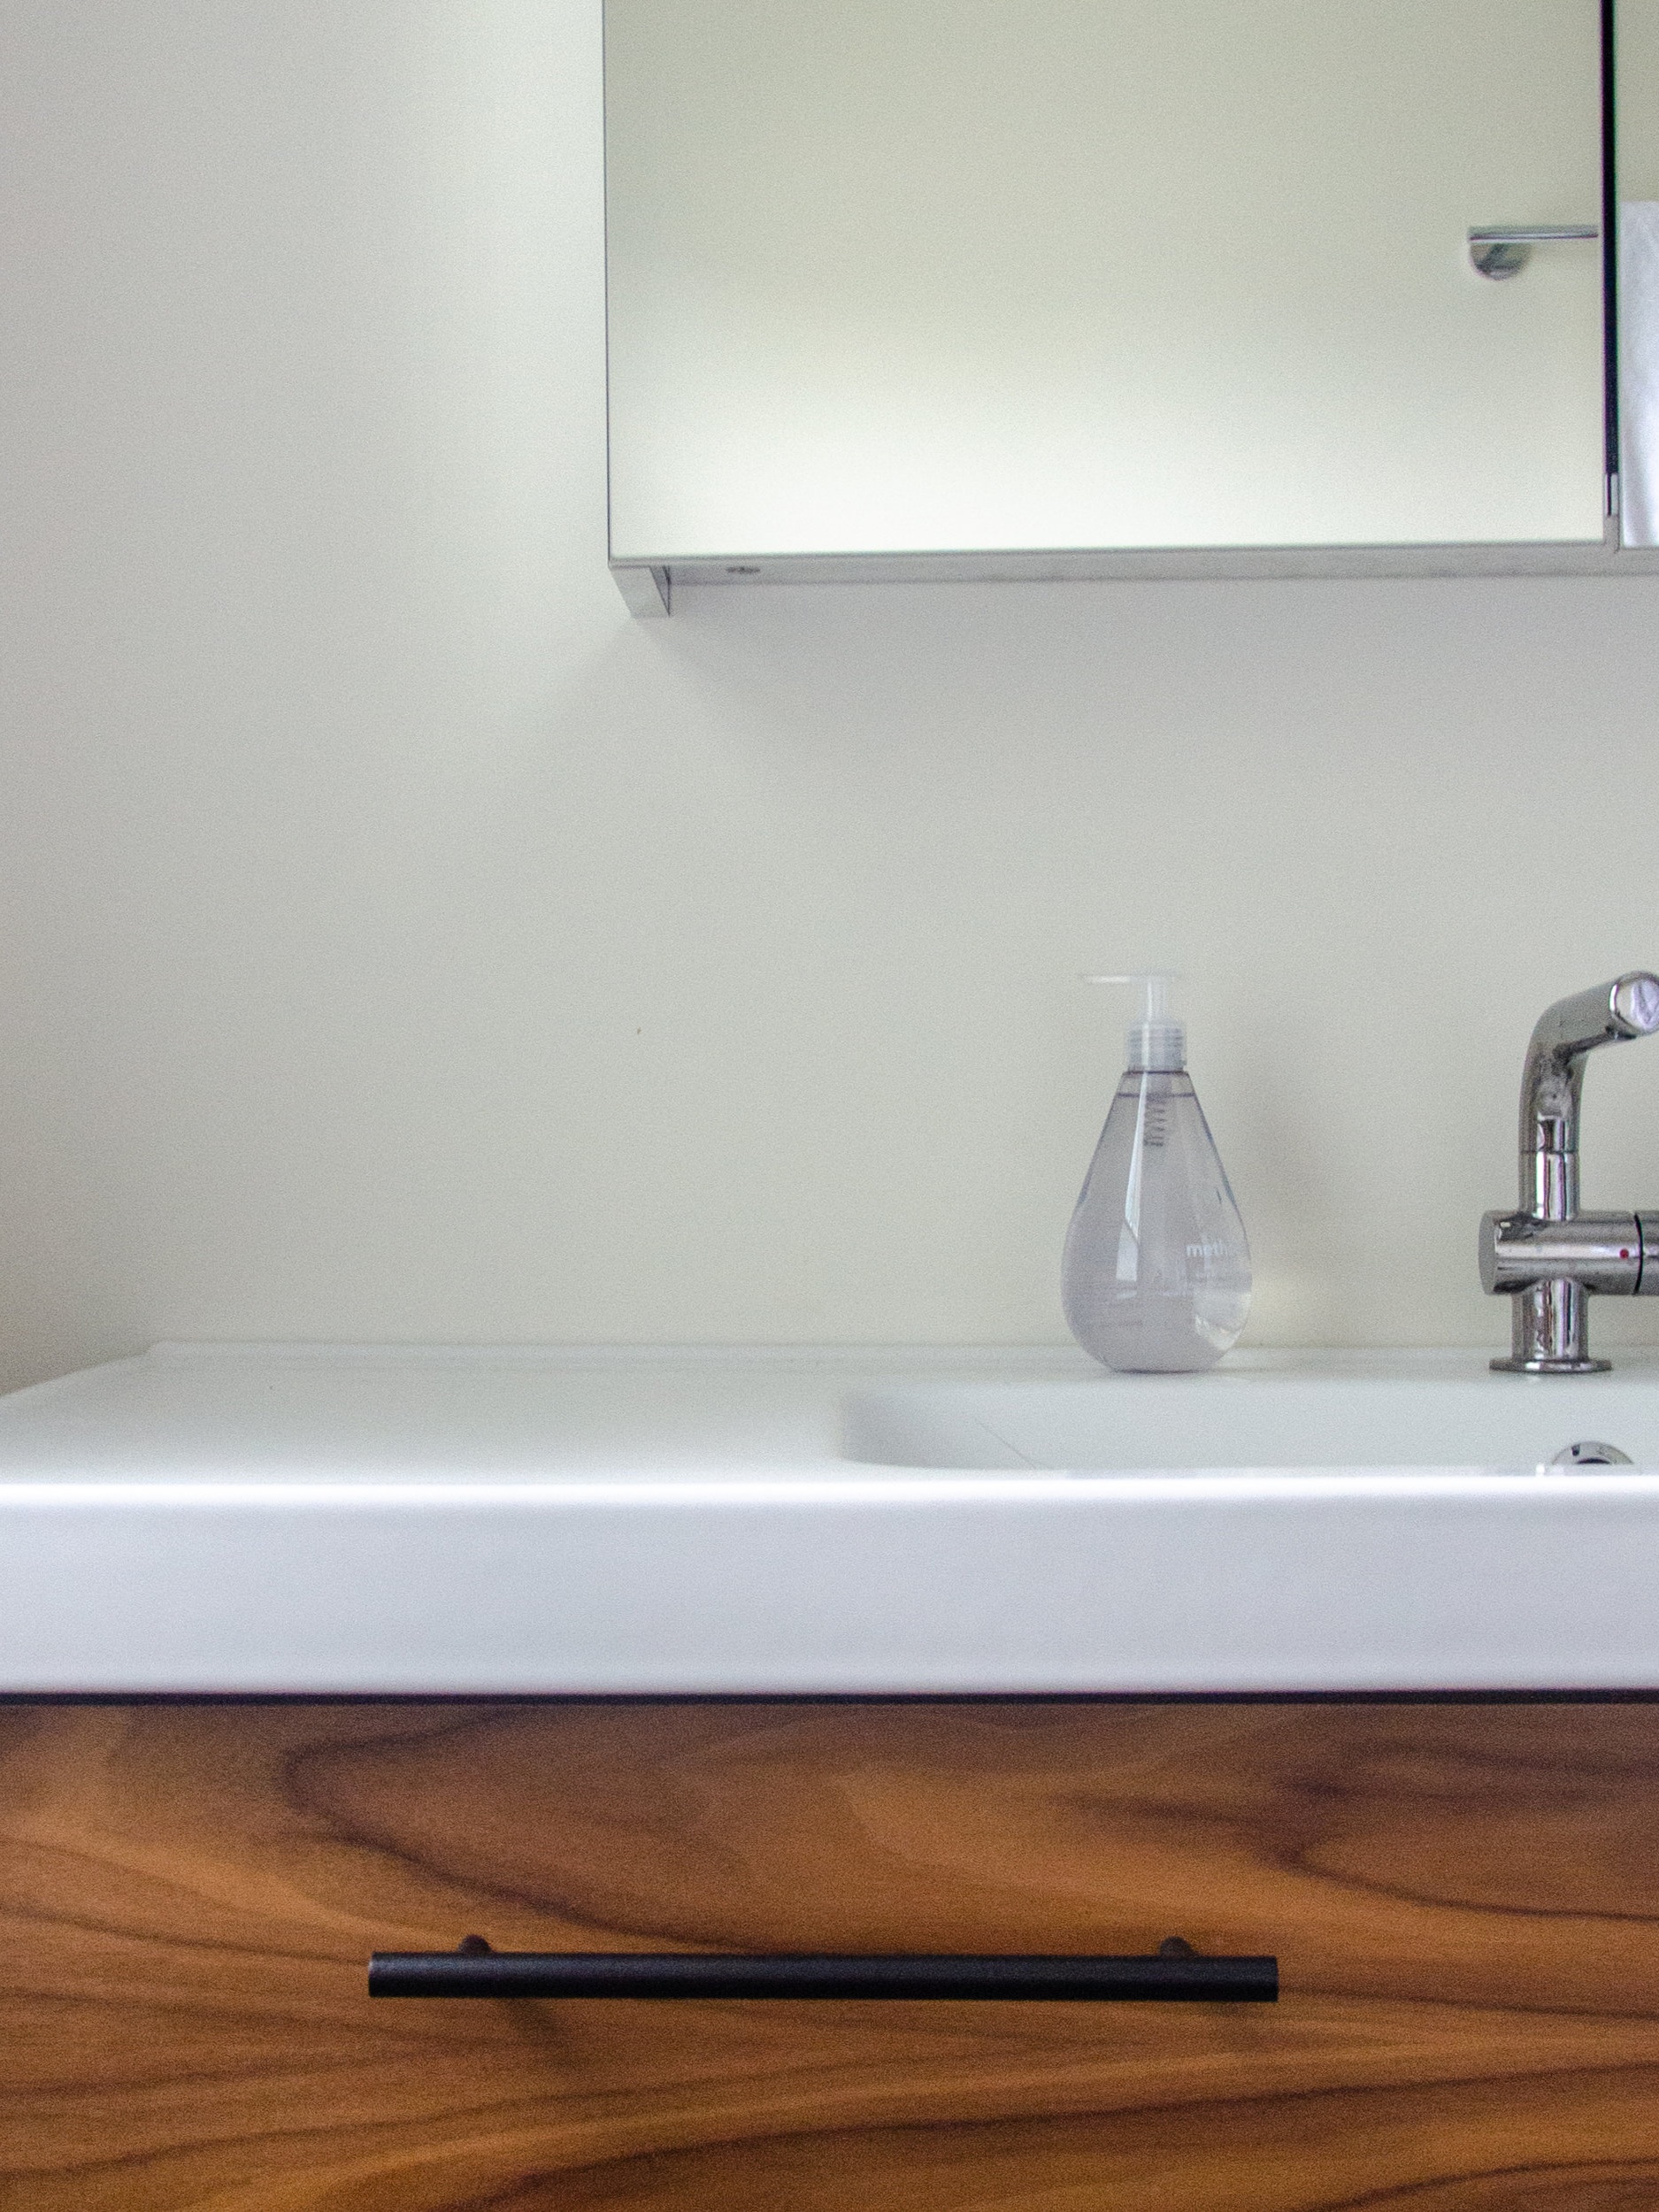 Ikea Godmorgon Bathroom Vanity and Mirror: Our Review